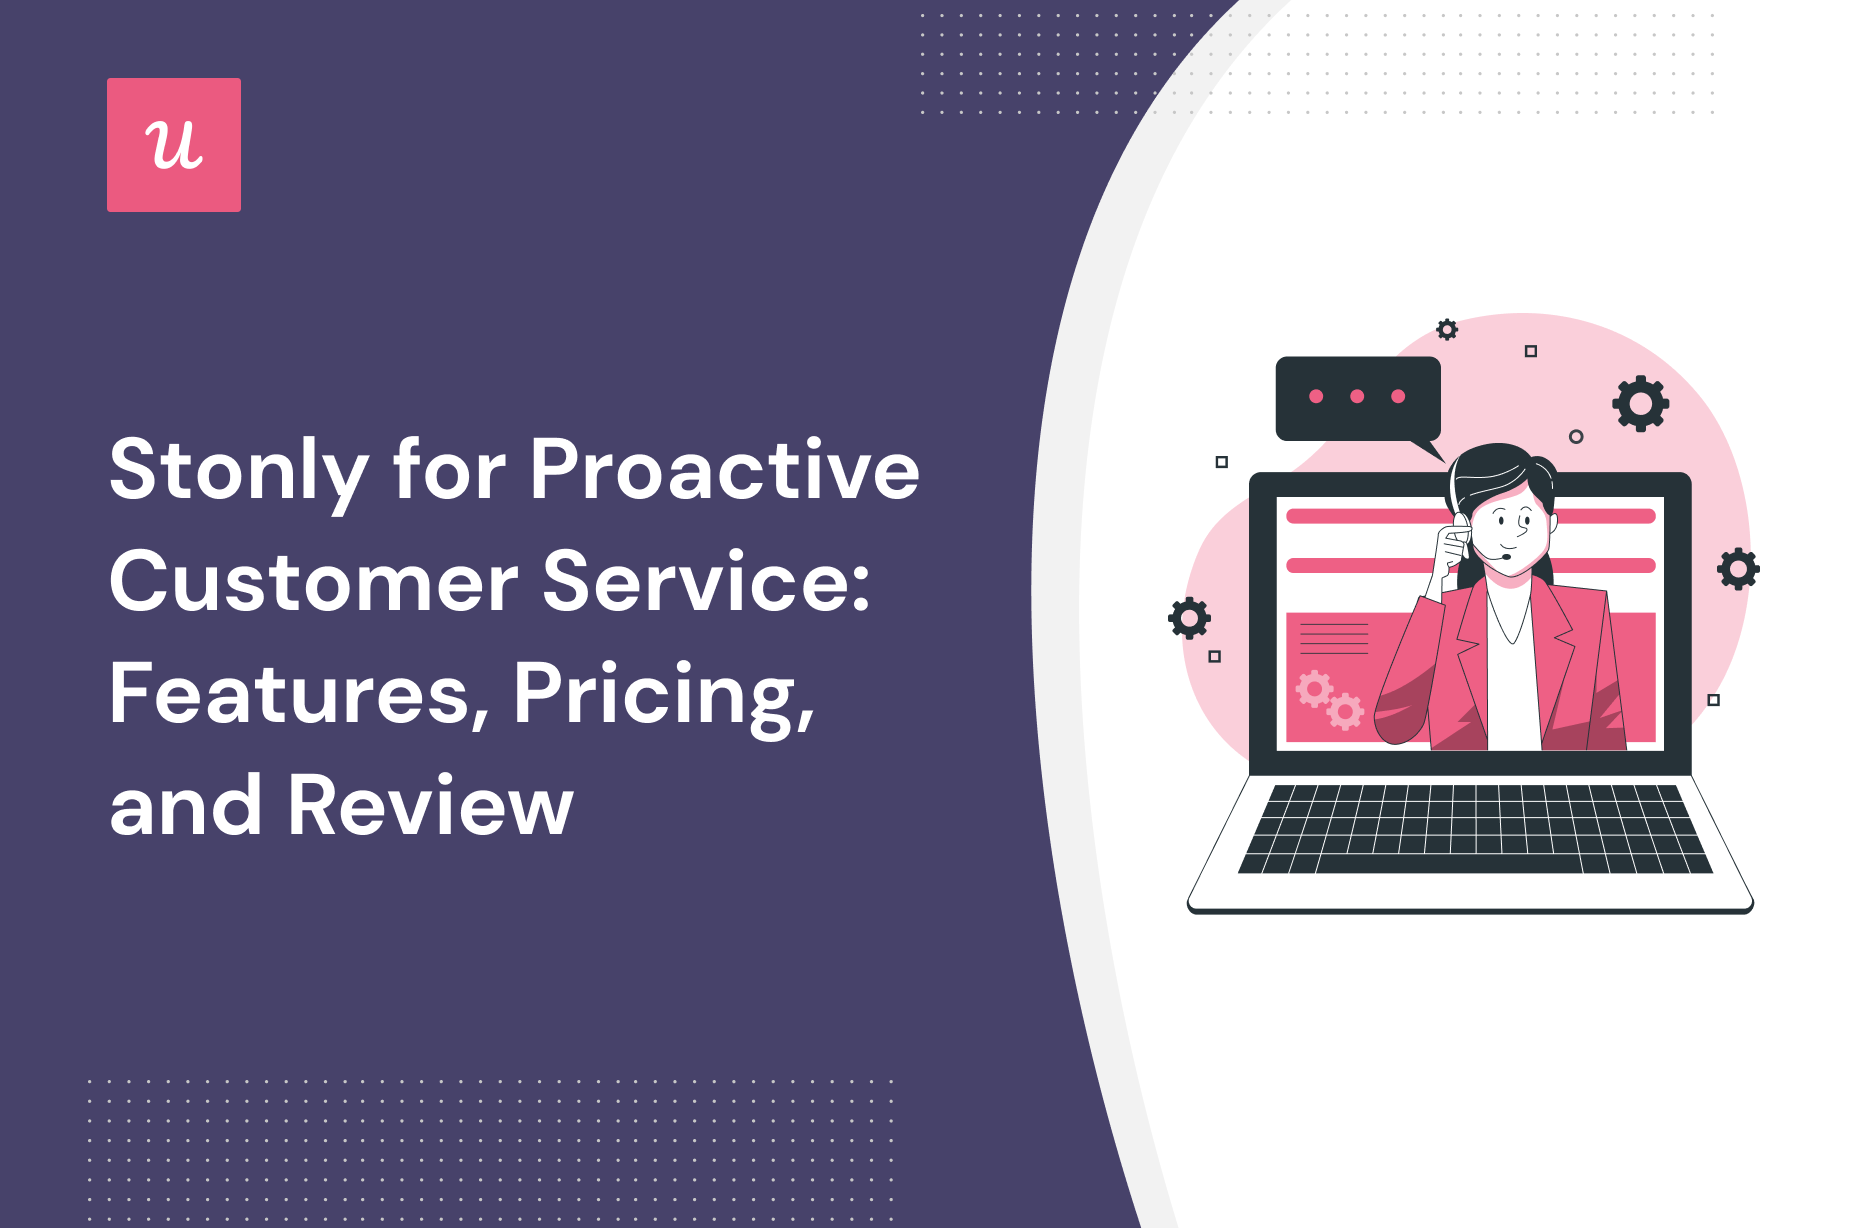 Stonly for Proactive Customer Service: Features, Pricing, and Review